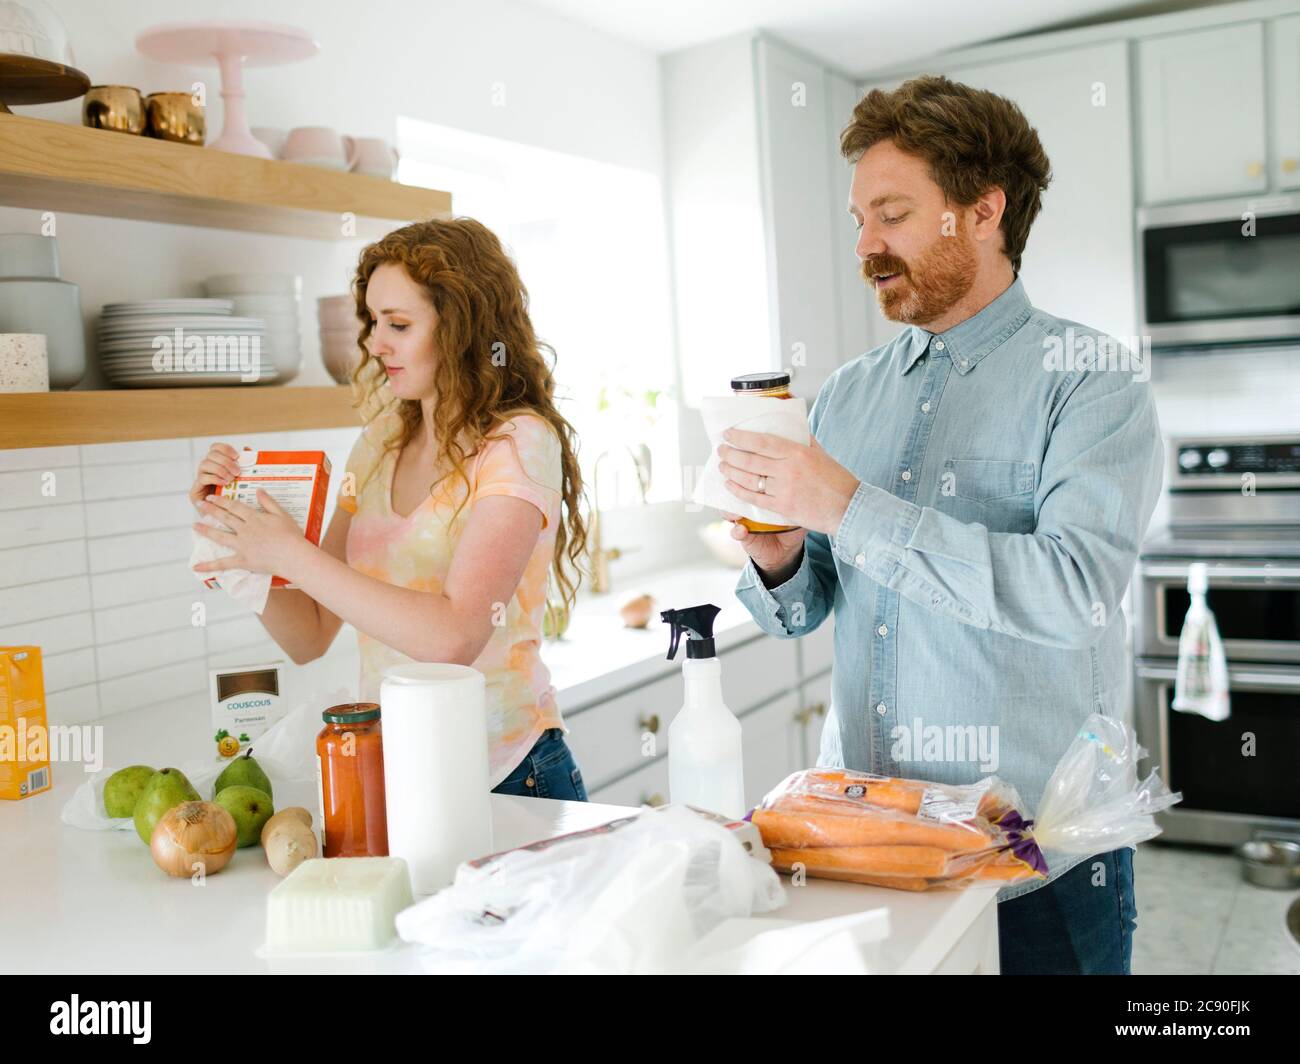 Man and woman cleaning groceries in kitchen Stock Photo